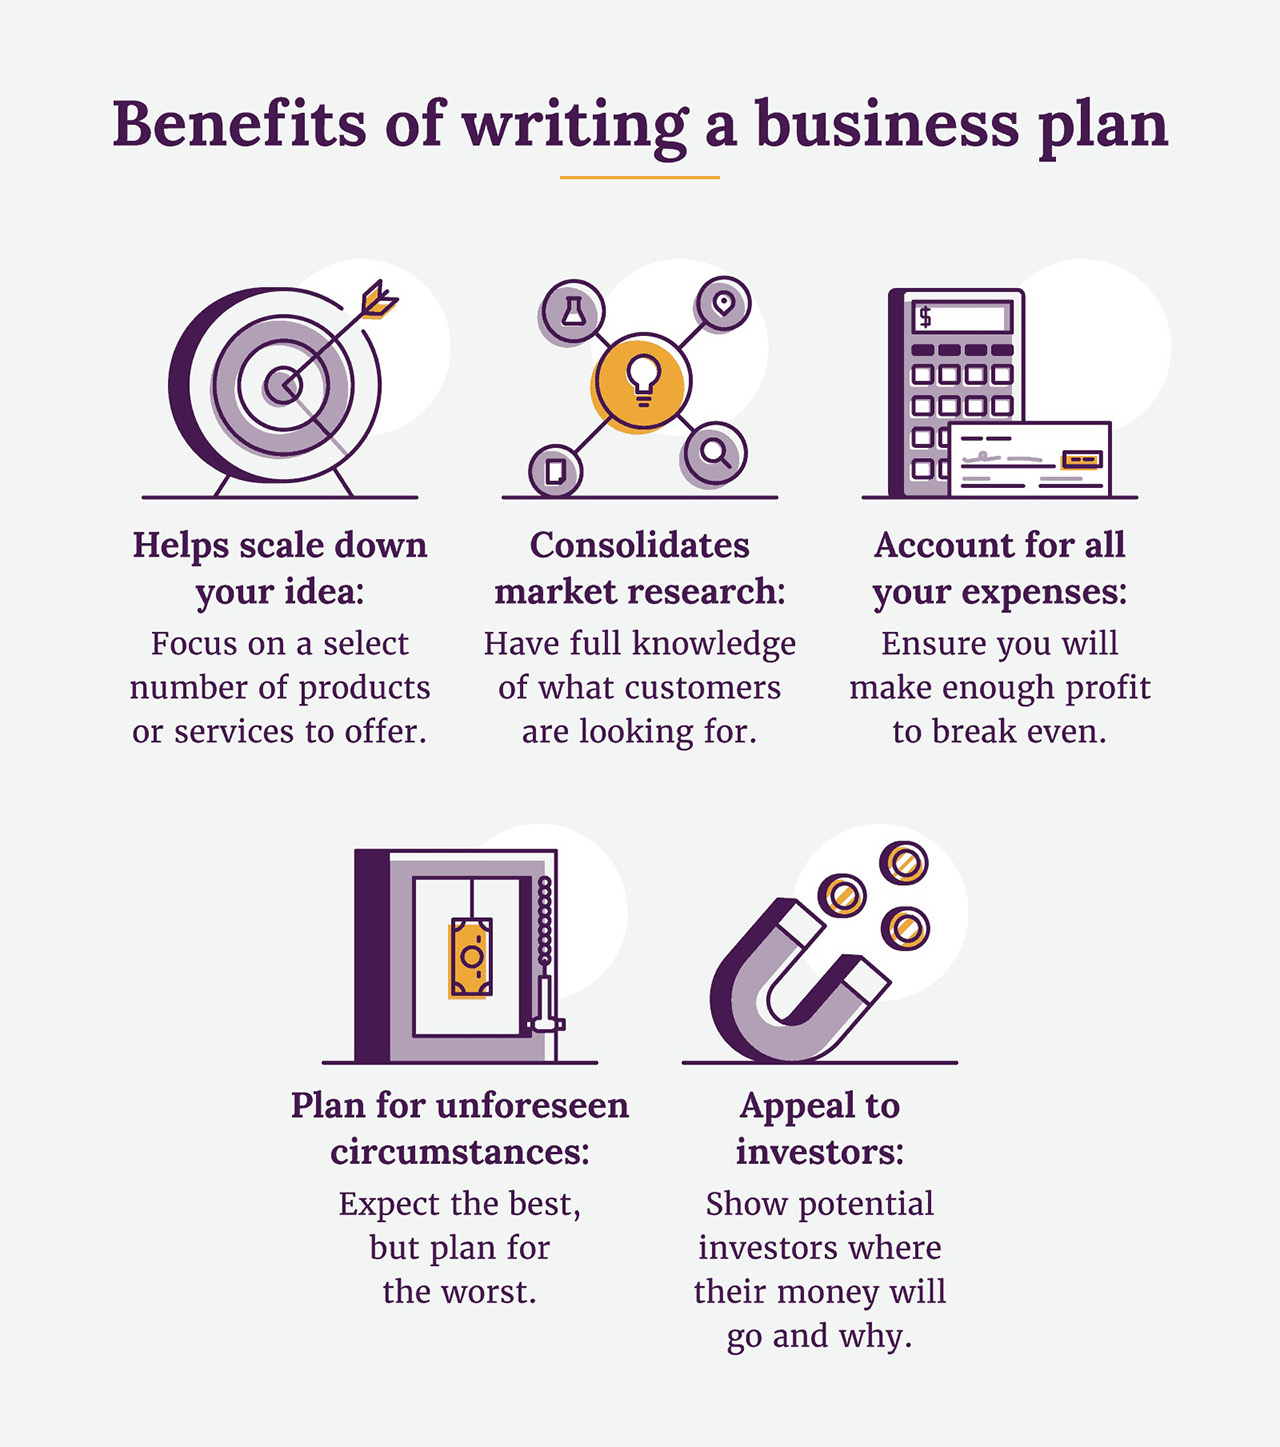 what are the importance and purposes of writing a business plan